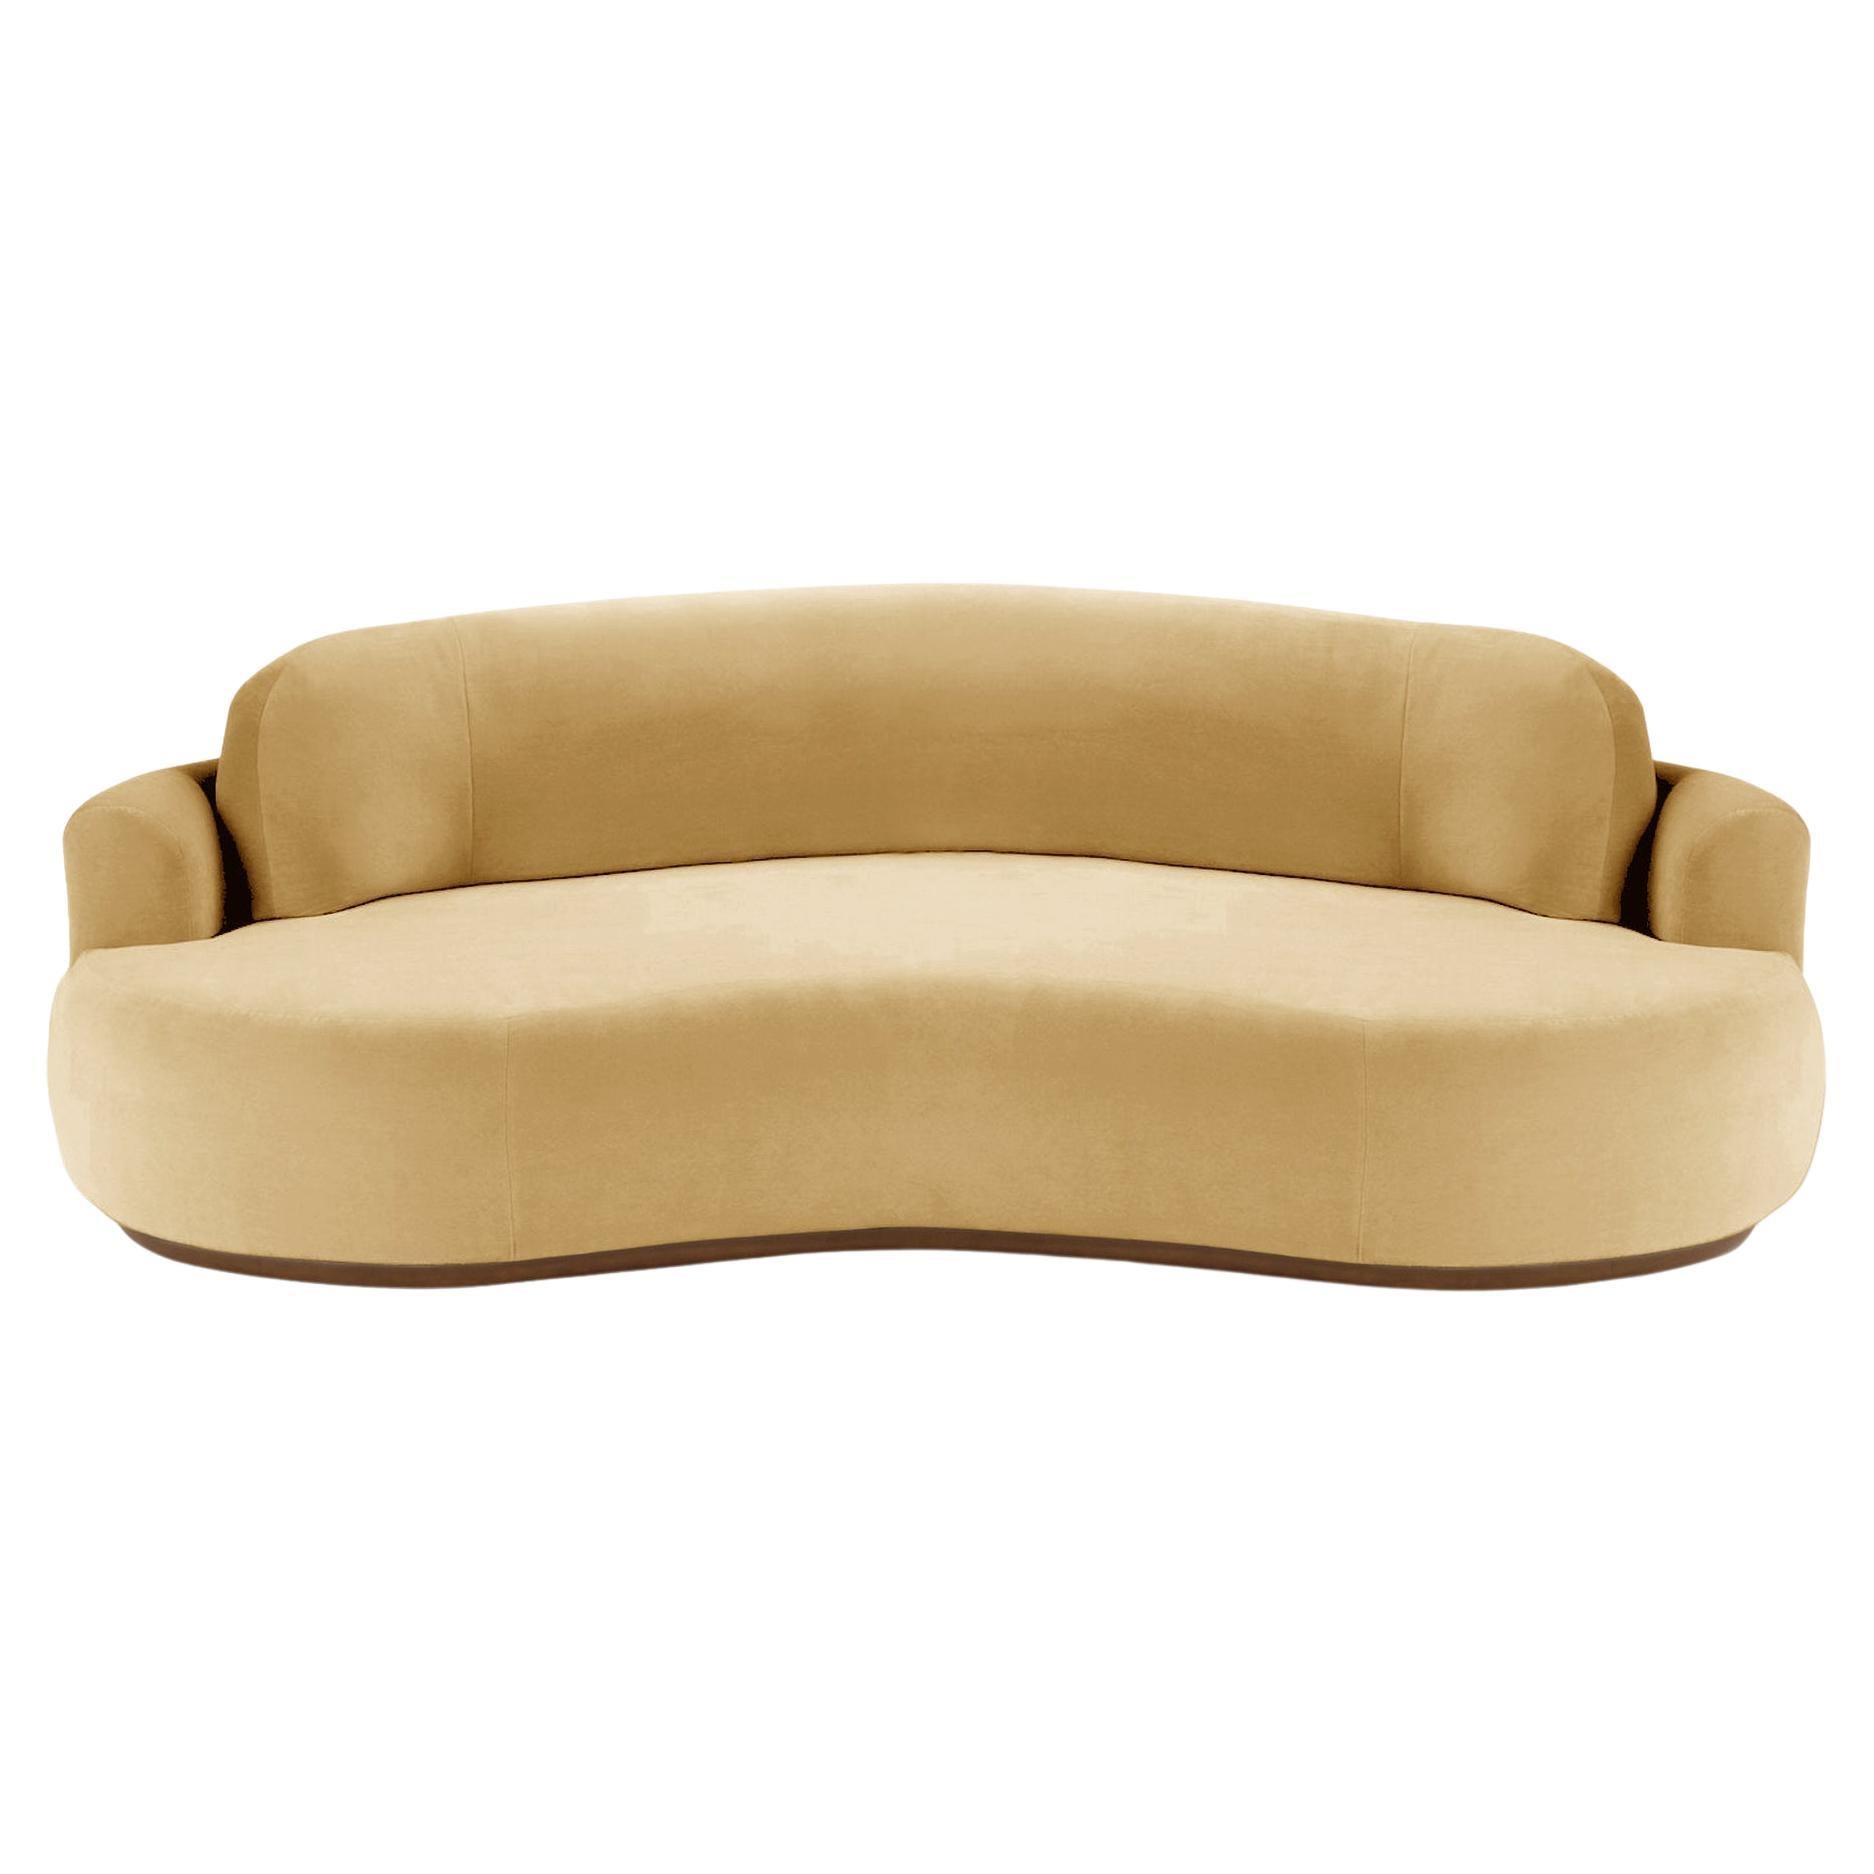 Naked Round Sofa, Large with Beech Ash-056-1 and Vigo Plantain For Sale